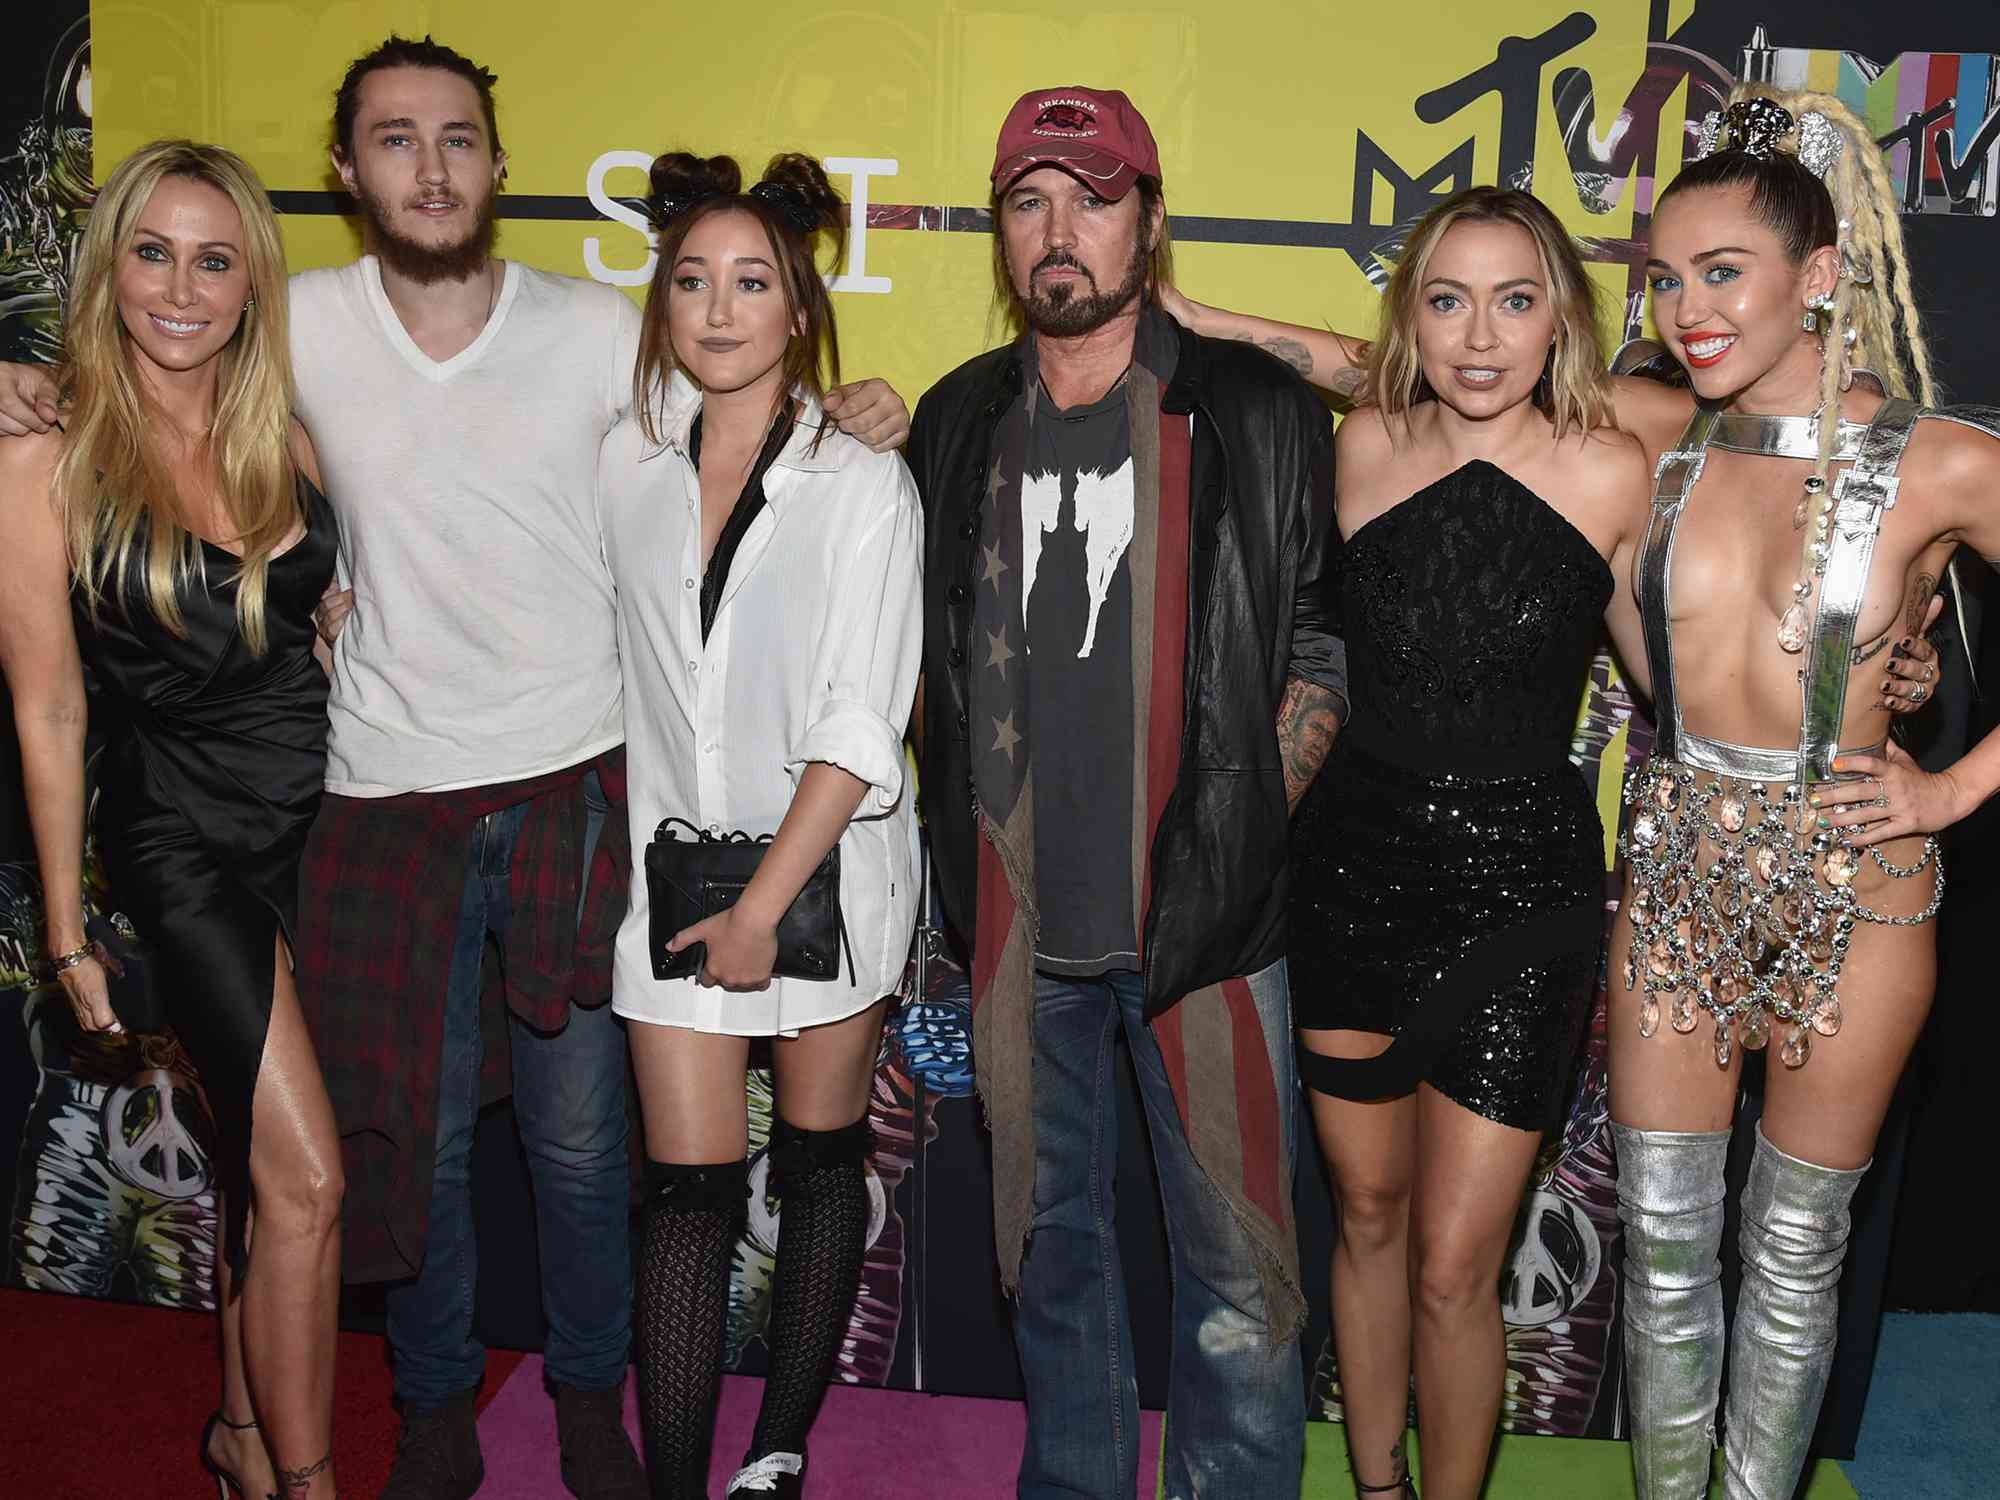 Tish Cyrus, actors Braison Cyrus, Noah Cyrus, recording artist Billy Ray Cyrus, actress Brandi Glenn Cyrus and host Miley Cyrus attend the 2015 MTV Video Music Awards at Microsoft Theater on August 30, 2015 in Los Angeles, California